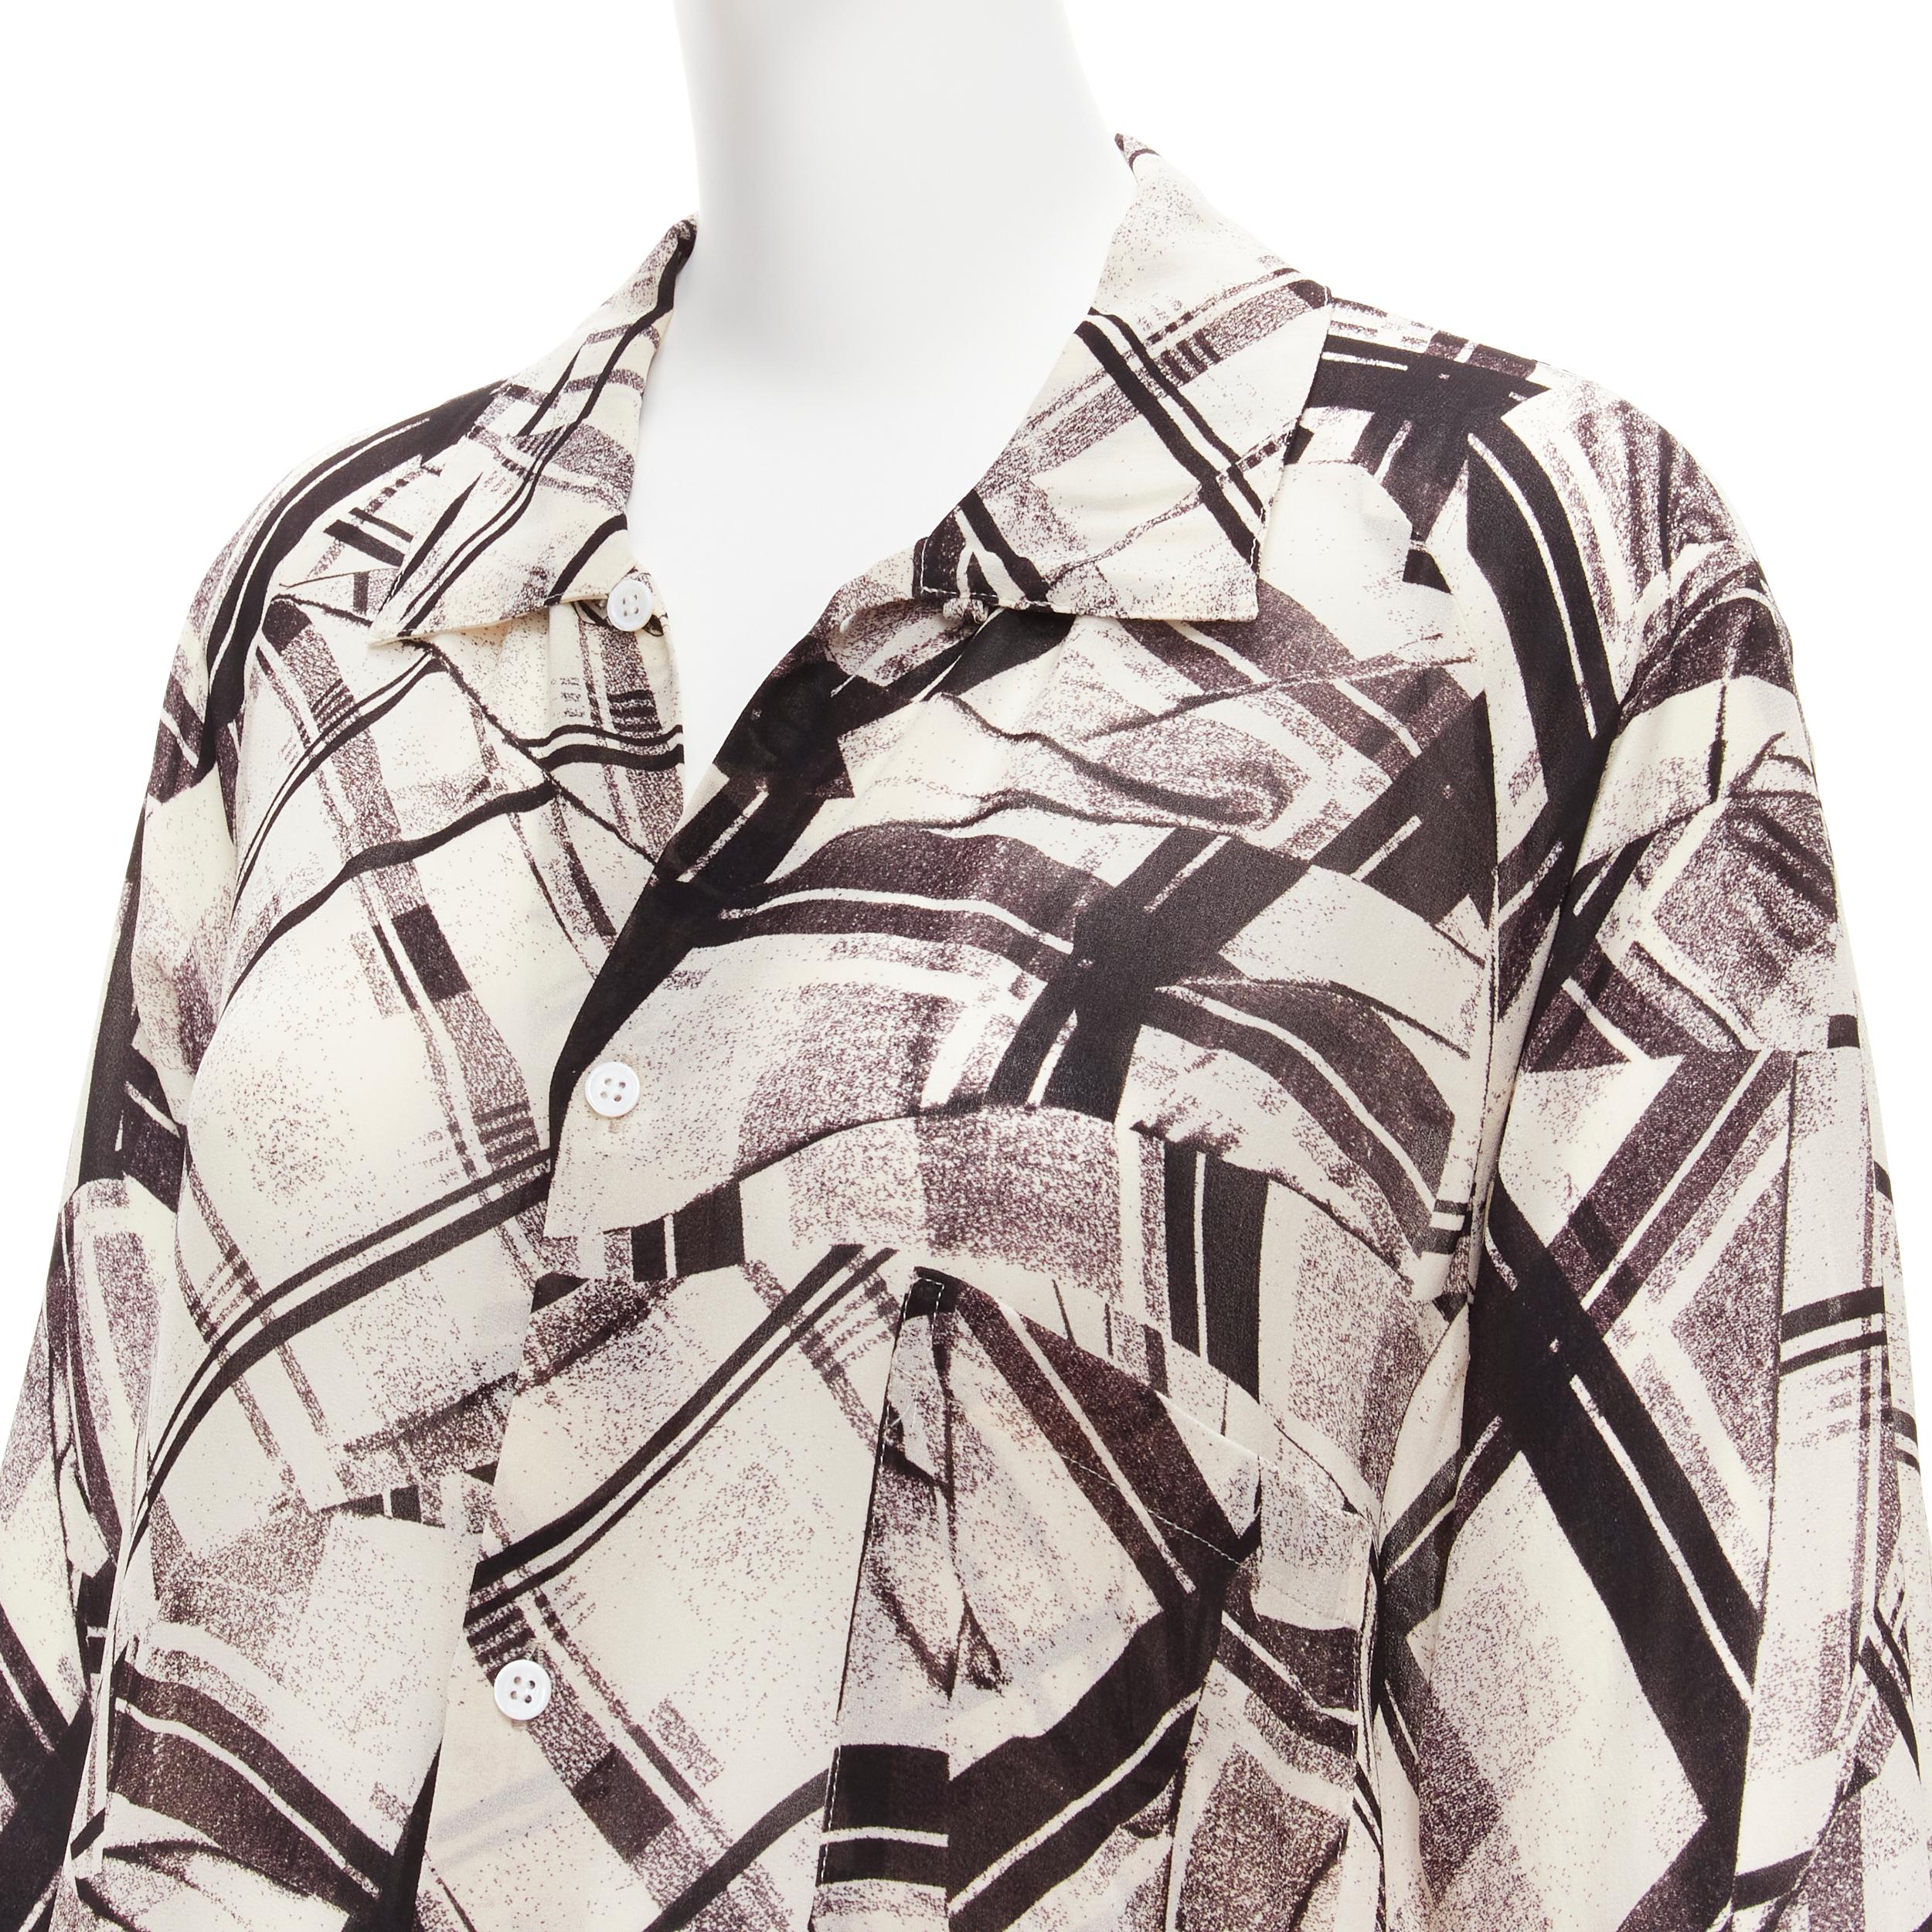 YOHJI YAMAMOTO Y'S abstract checked patchwork printed draped shirt dress JP1 S
Reference: TGAS/C02020
Brand: Yohji Yamamoto
Collection: Y'S
Material: Feels like silk
Color: Beige, Black
Pattern: Abstract
Closure: Button
Extra Details: 1 pocket at